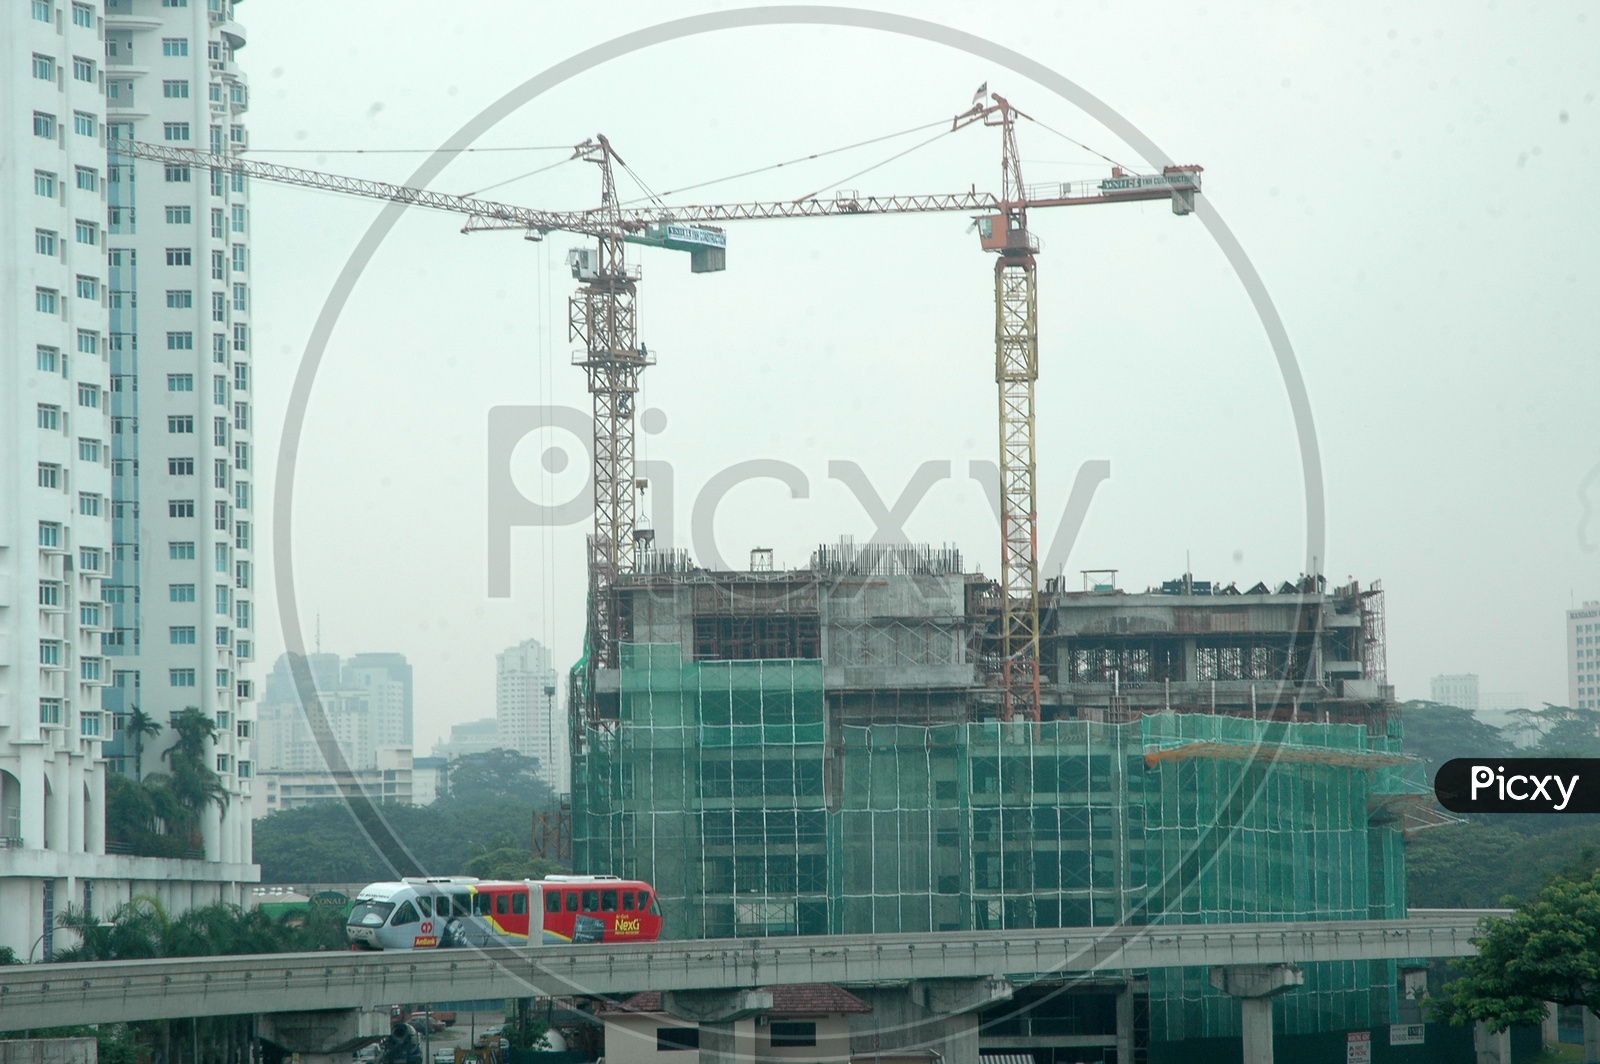 Tower Cranes alongside the high rise buildings